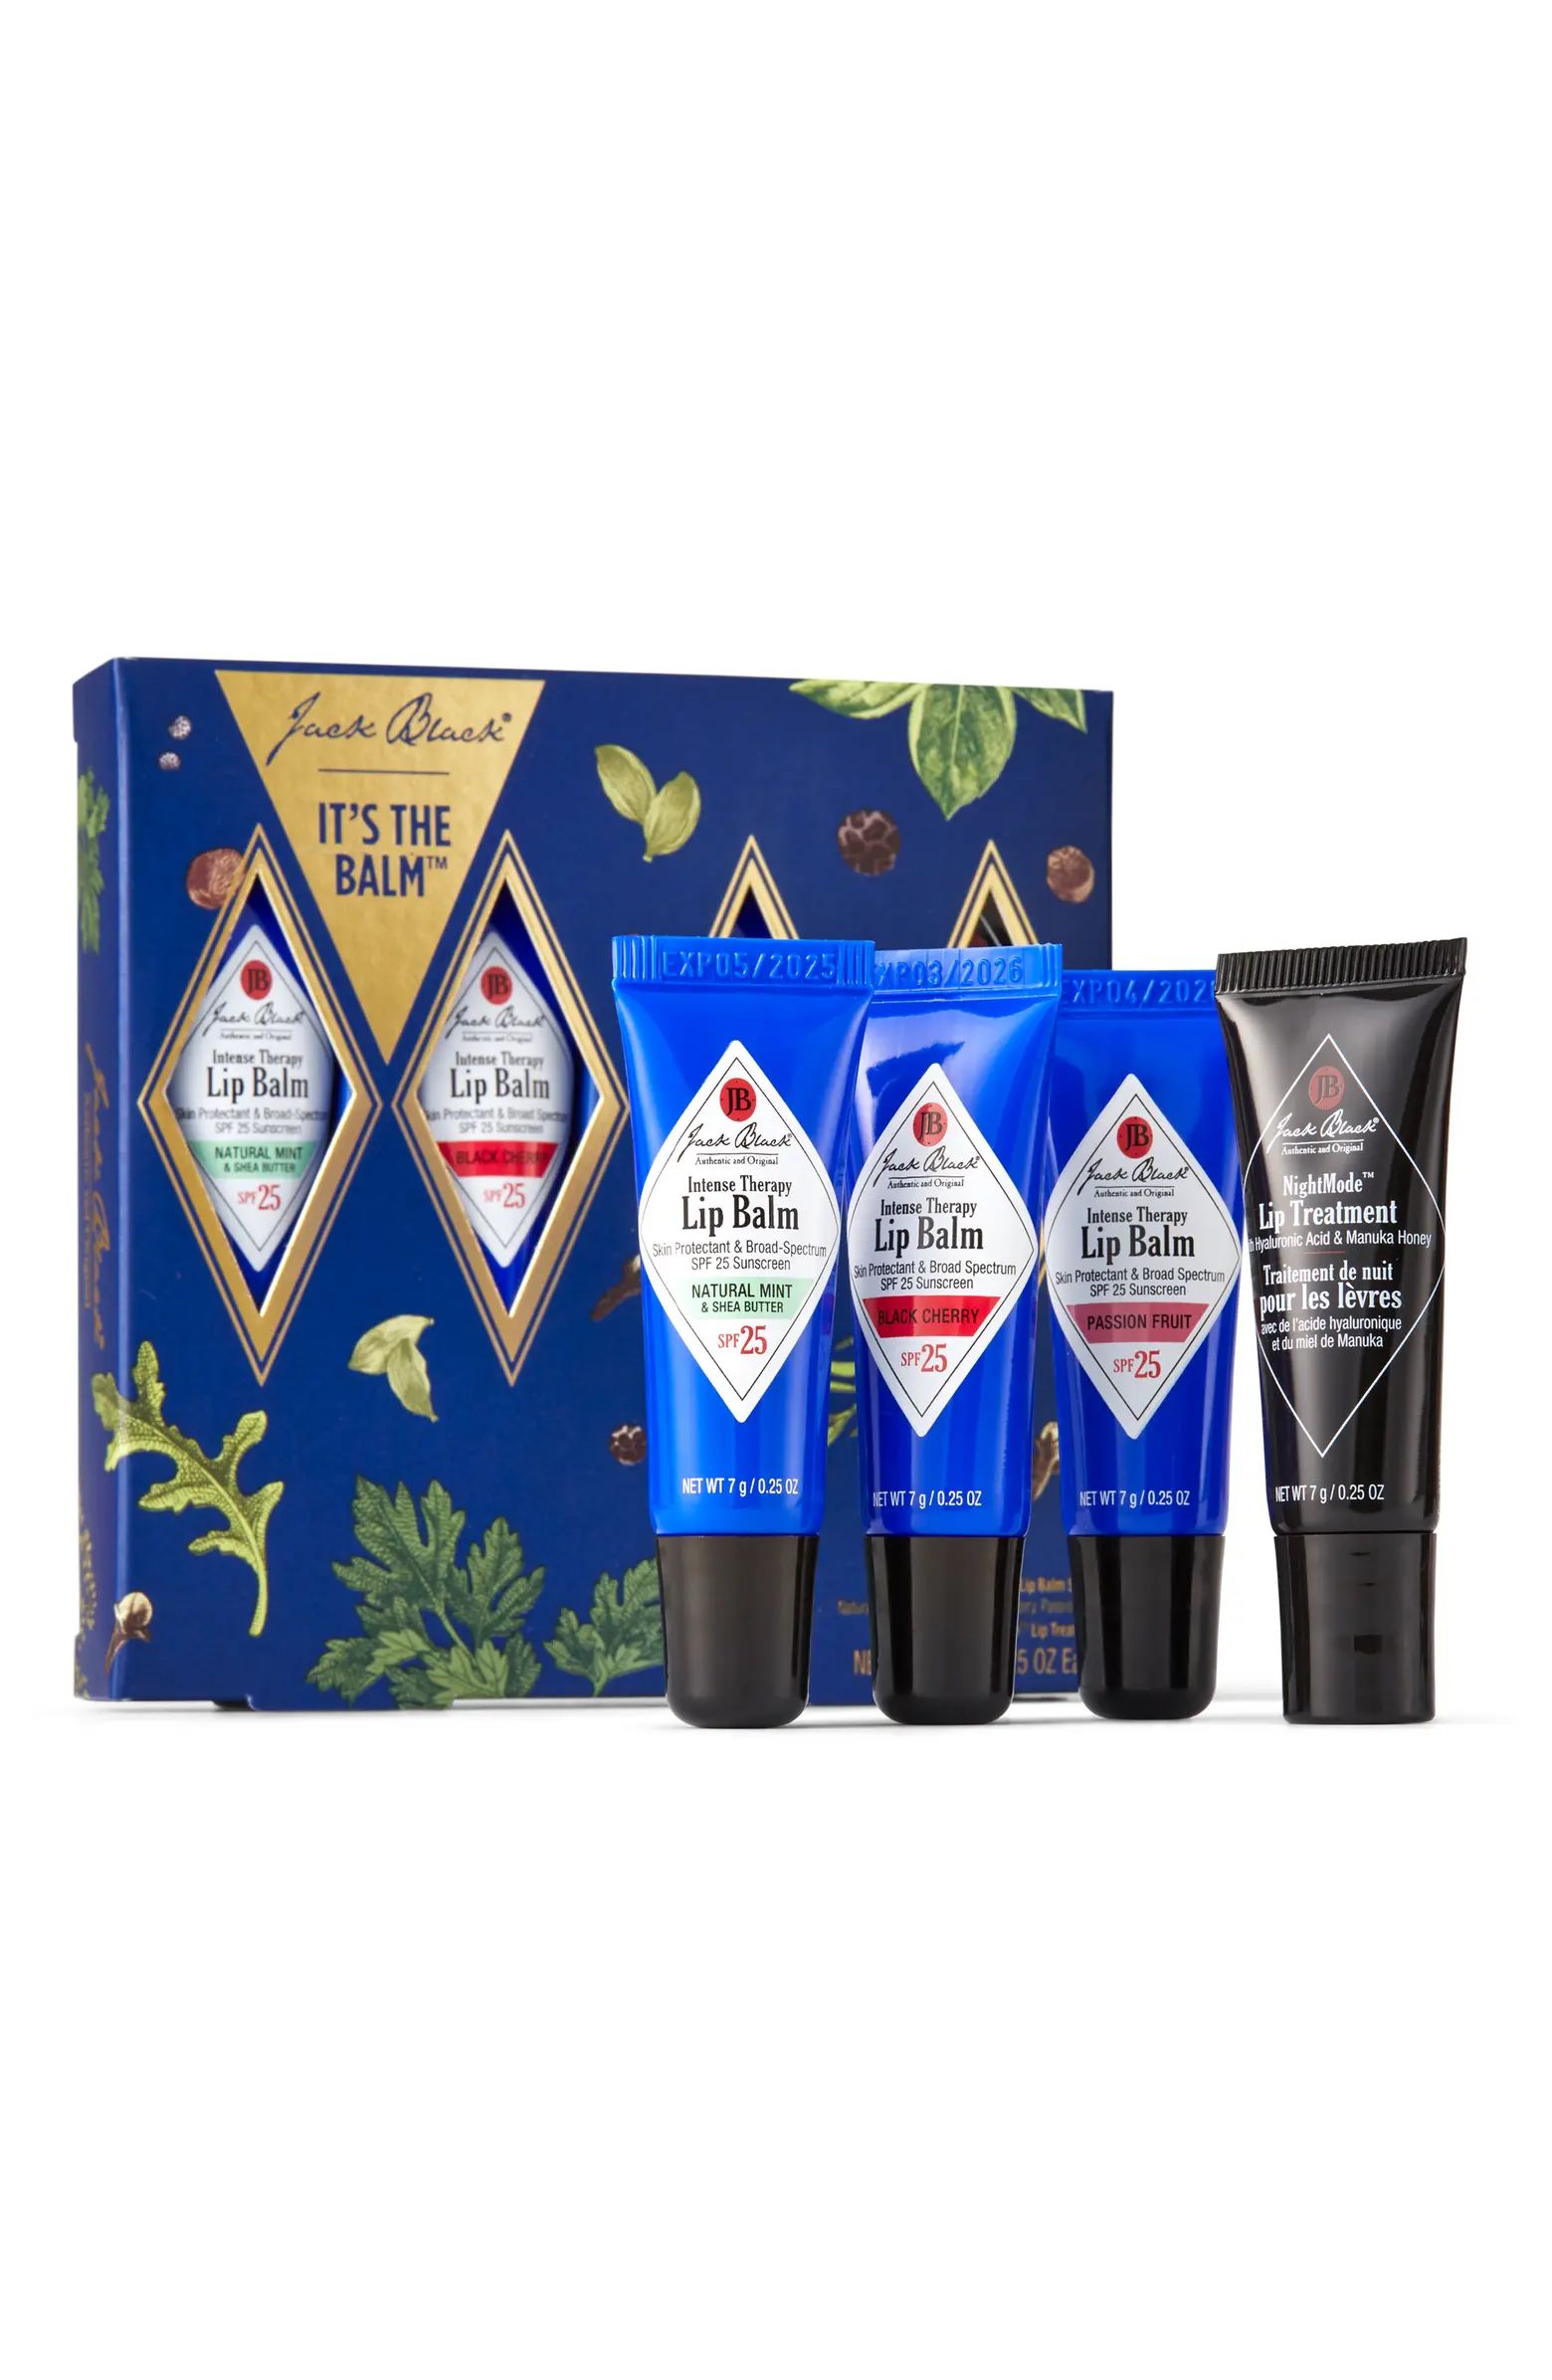 It's The Balm Lip Balm Set (Limited Edition) $42 Value | Nordstrom